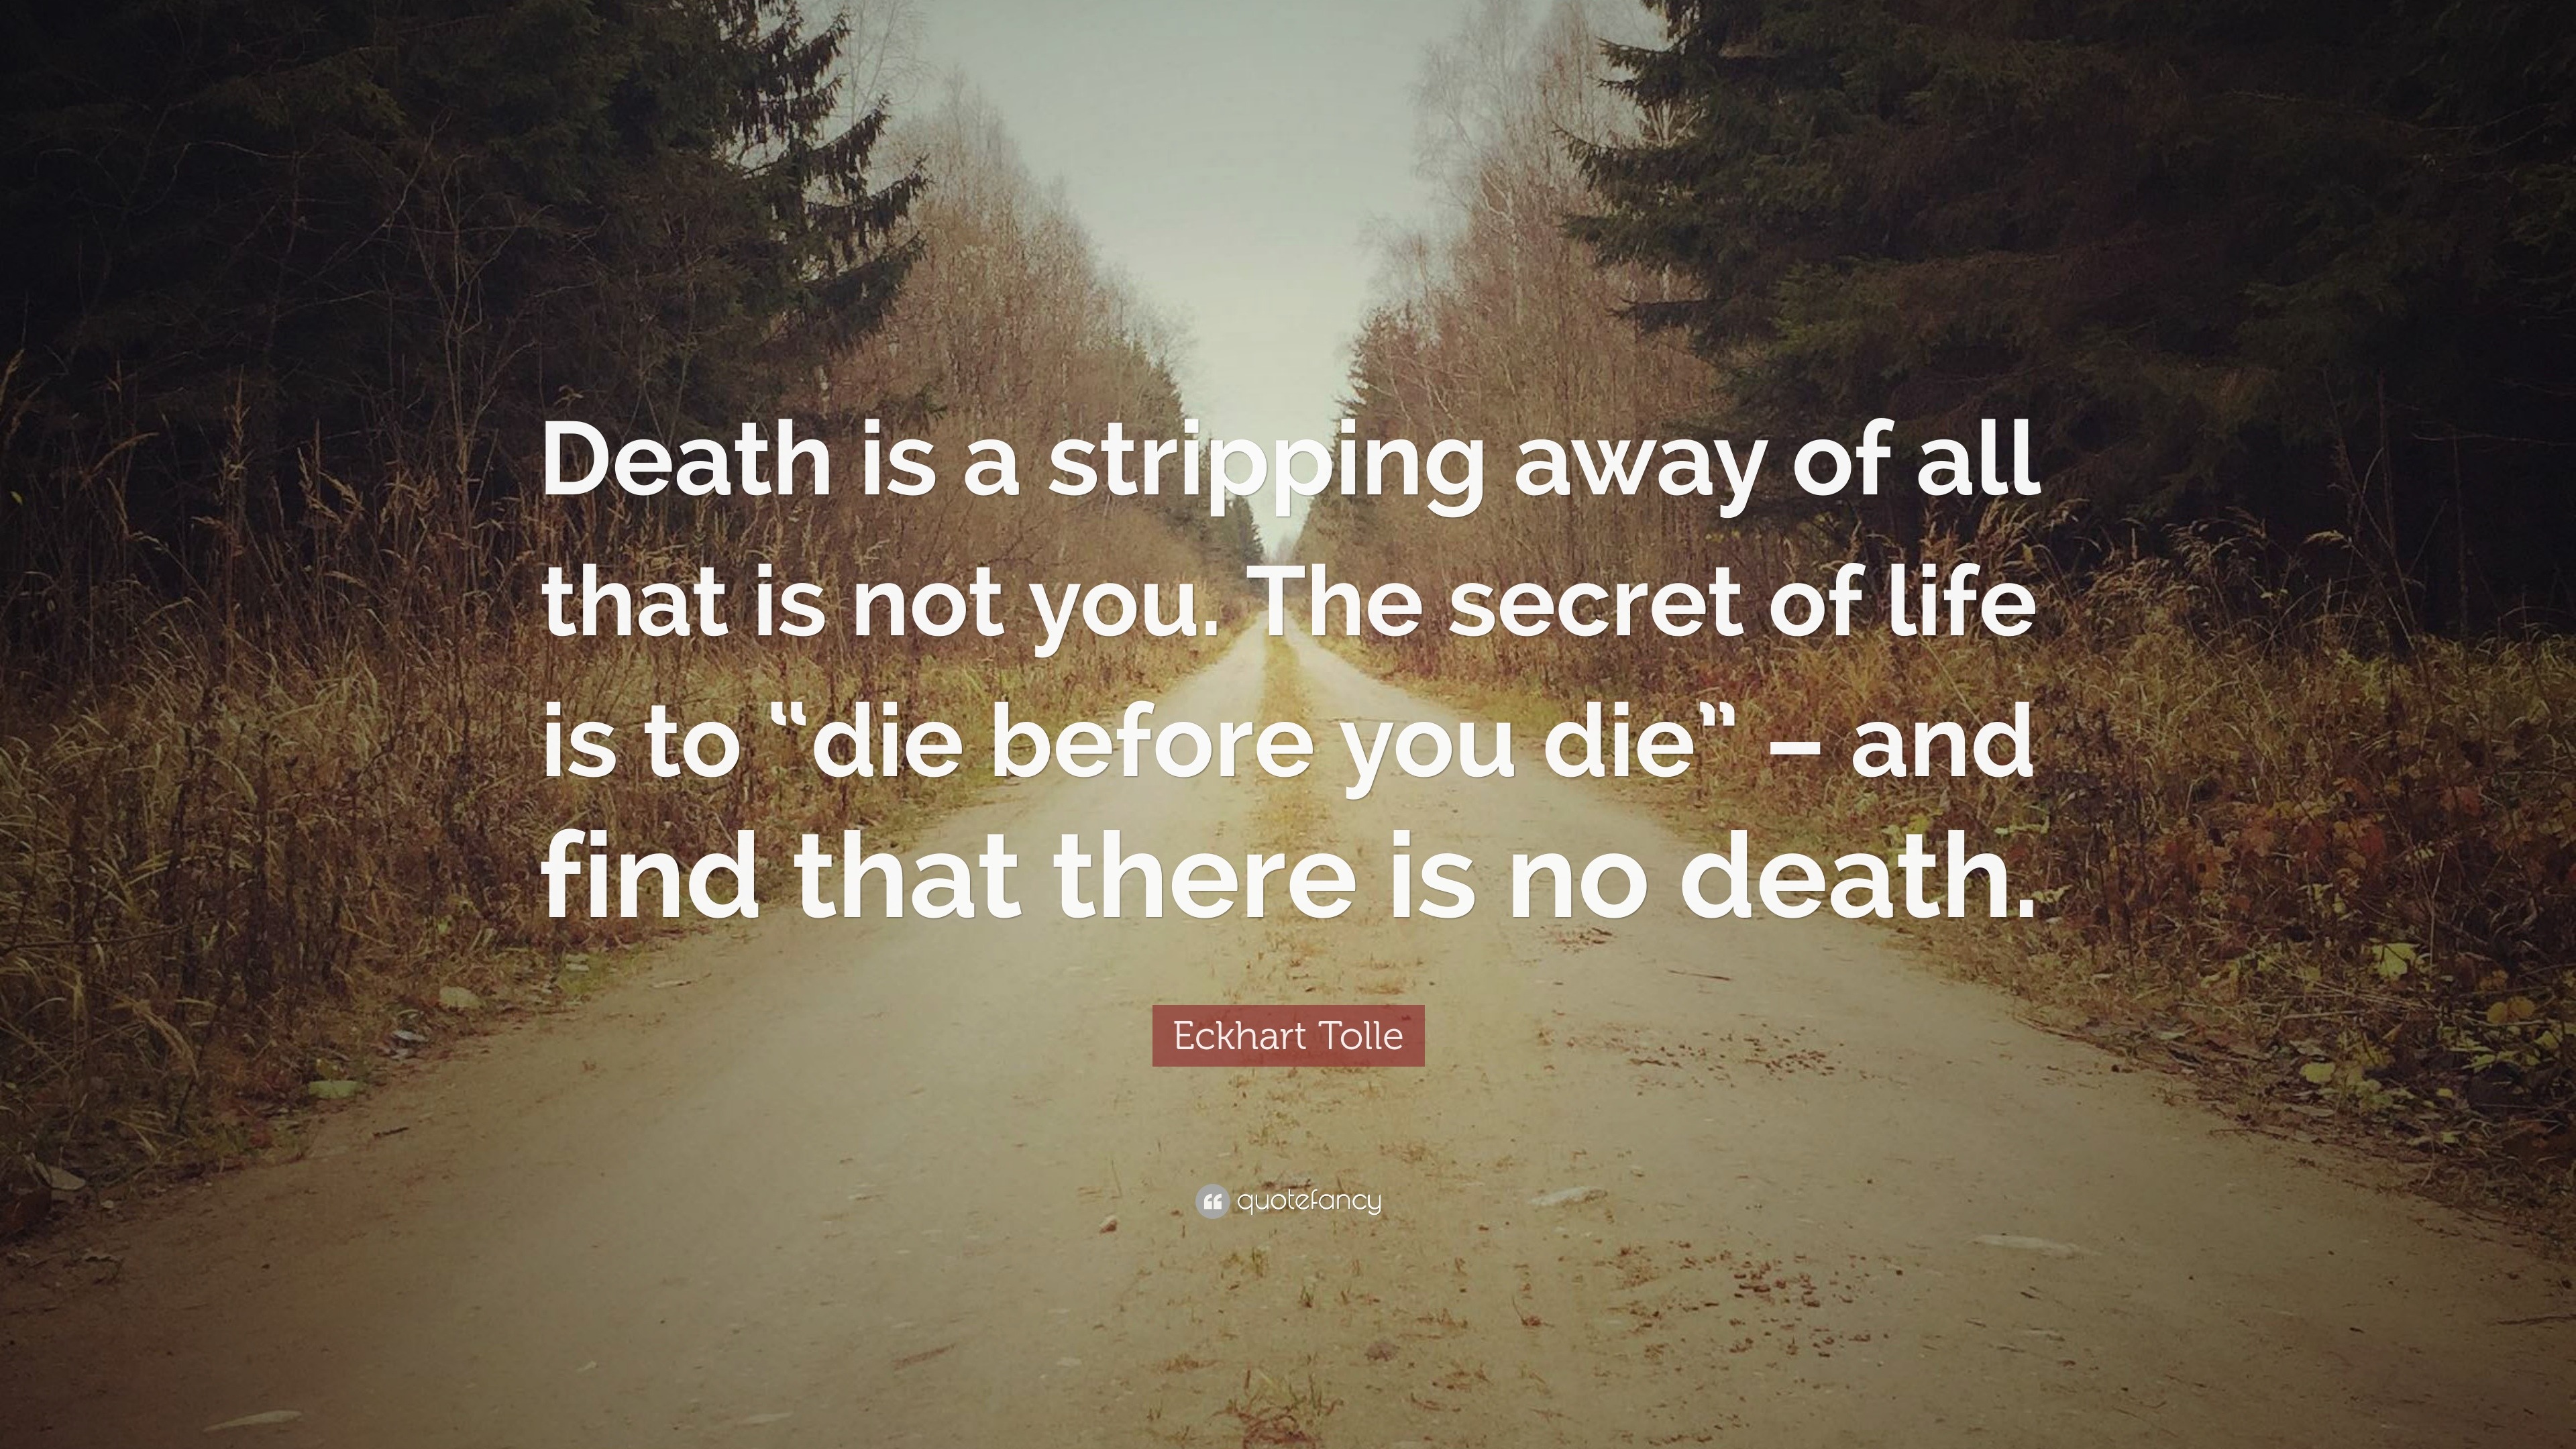 Eckhart Tolle Quote “Death is a stripping away of all that is not you